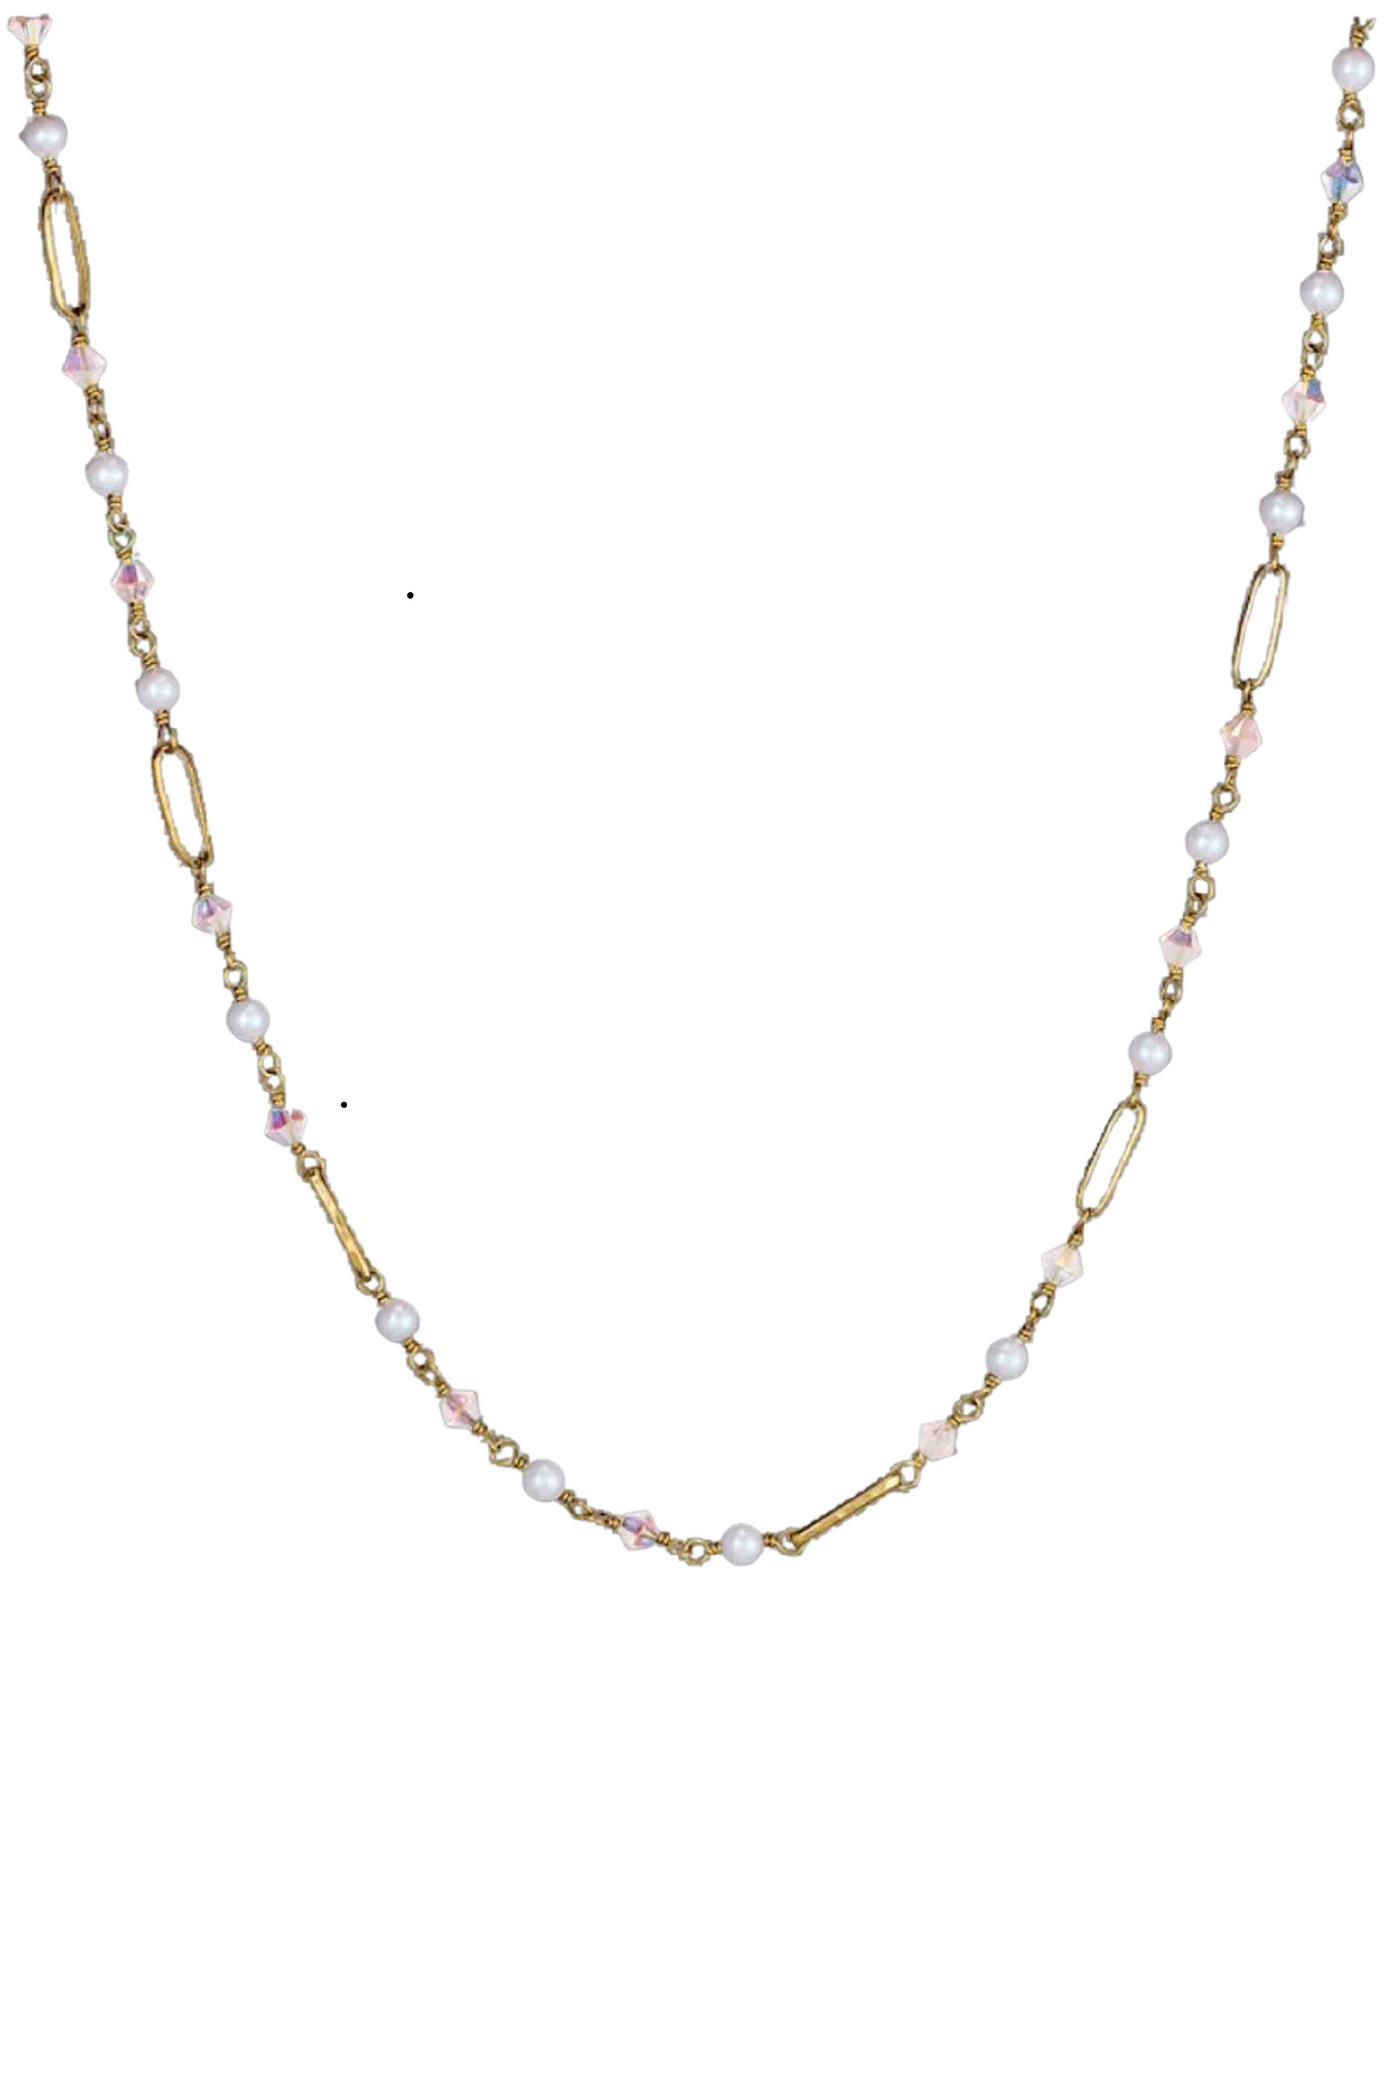 20" Mist Necklace by Waxing Poetic in Brass with Crystal Pearls and Crystal Beads.